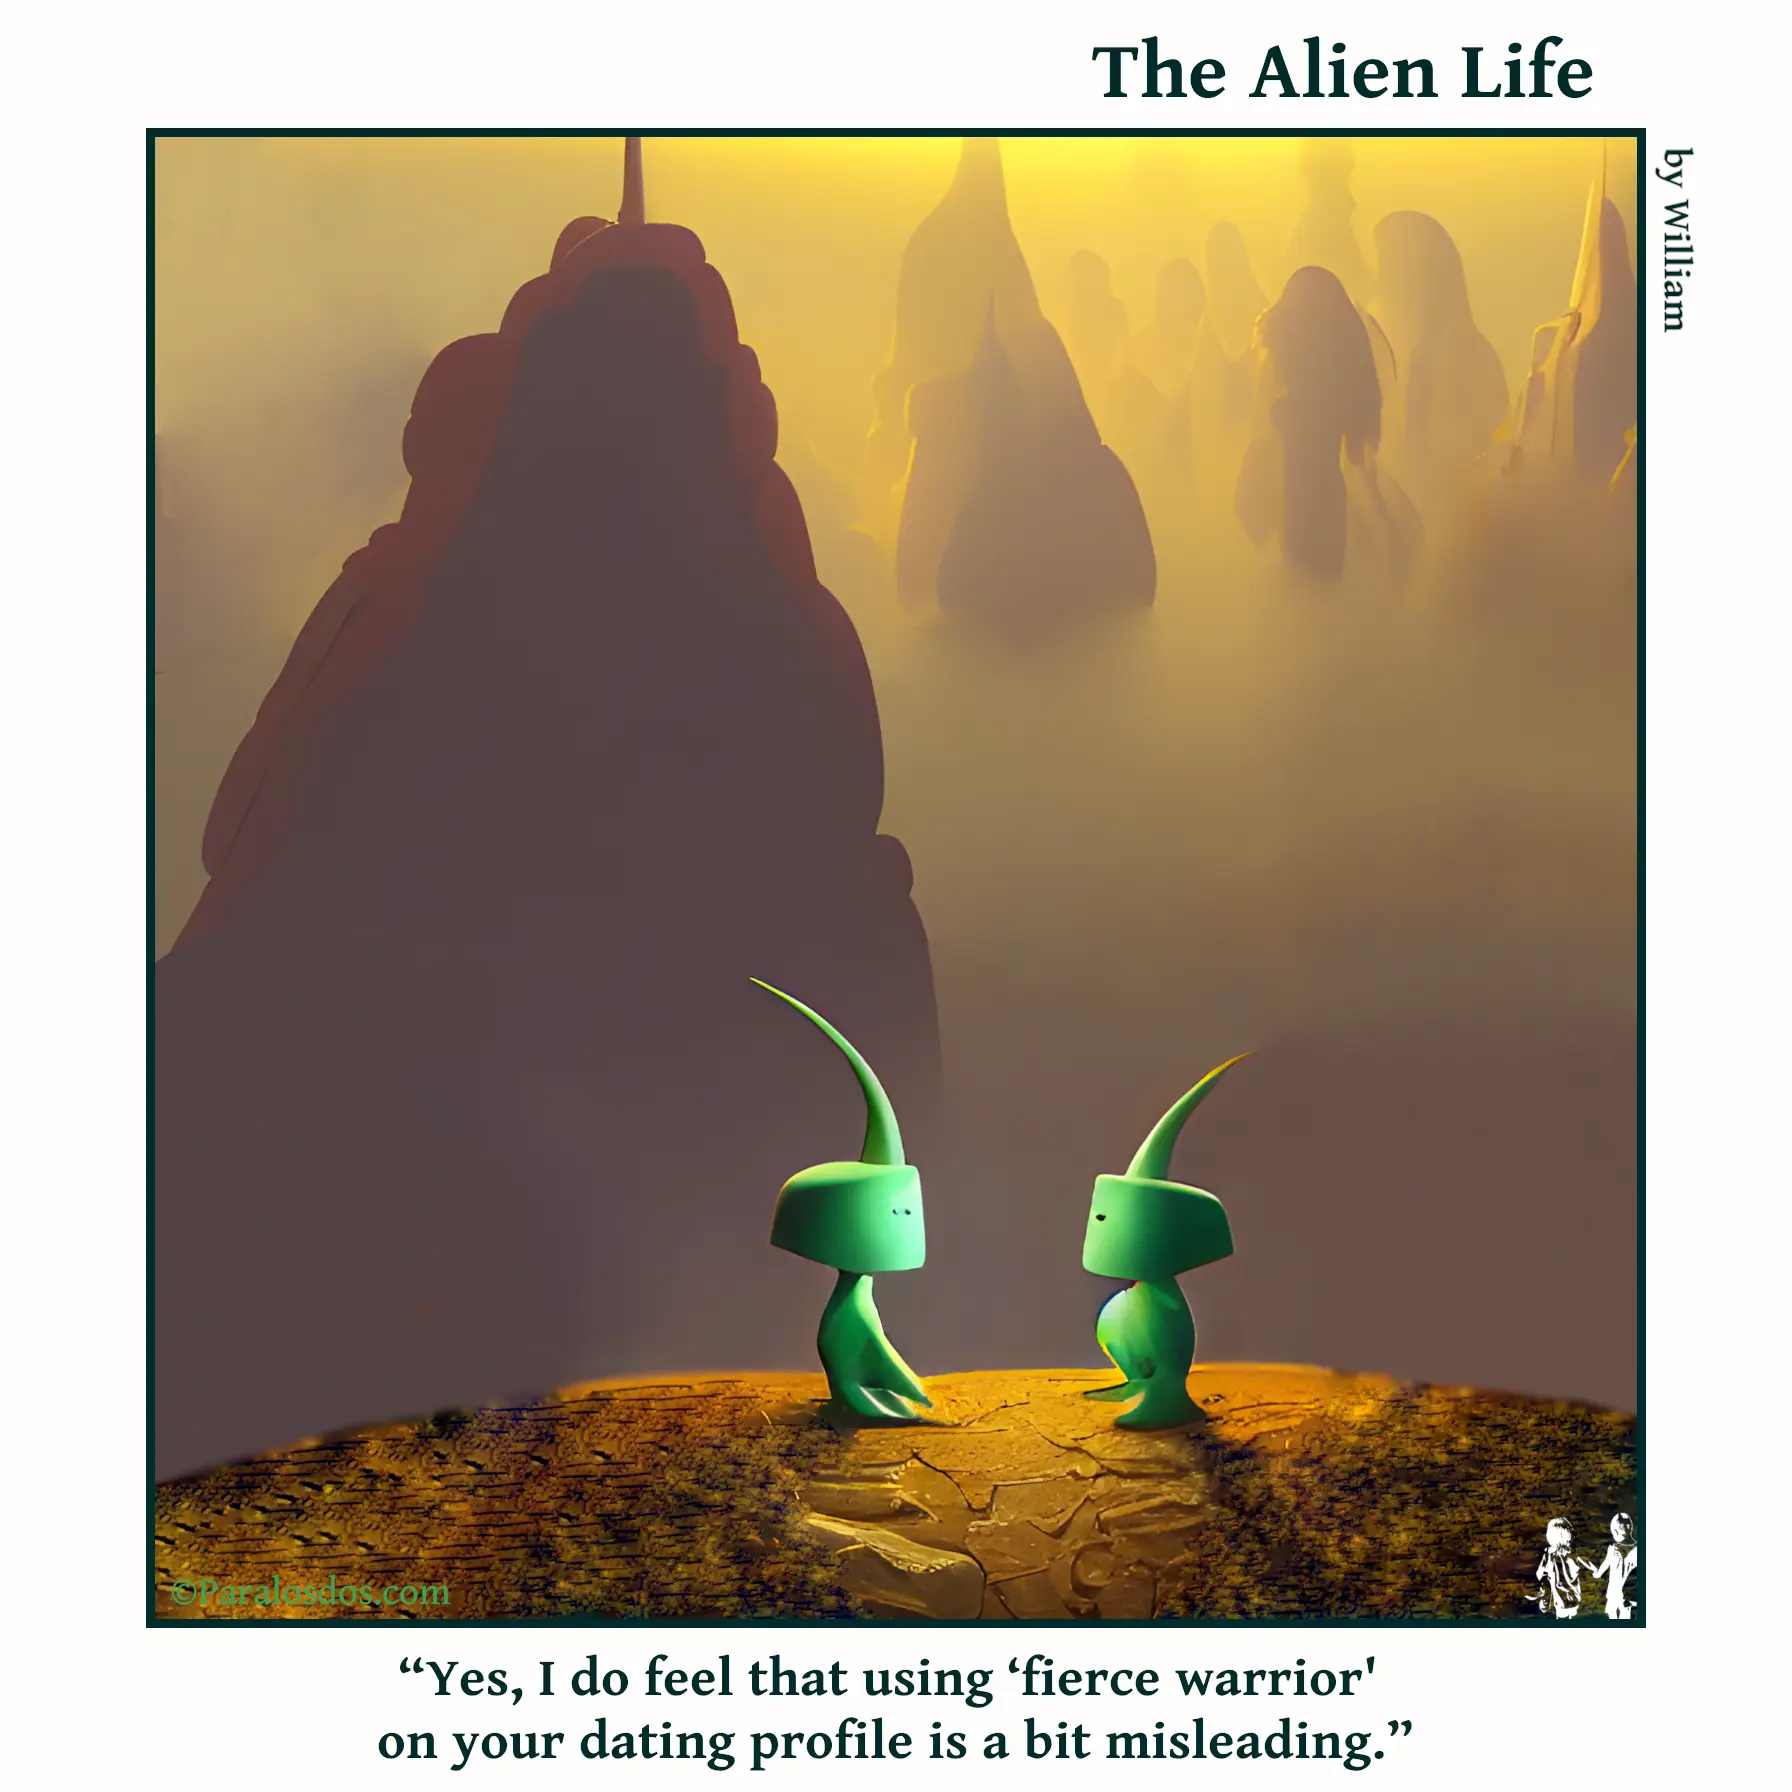 The Alien Life, one panel Comic. Two cute little aliens are chatting. The caption reads: “Yes, I do feel that using ‘fierce warrior' on your dating profile is a bit misleading.”